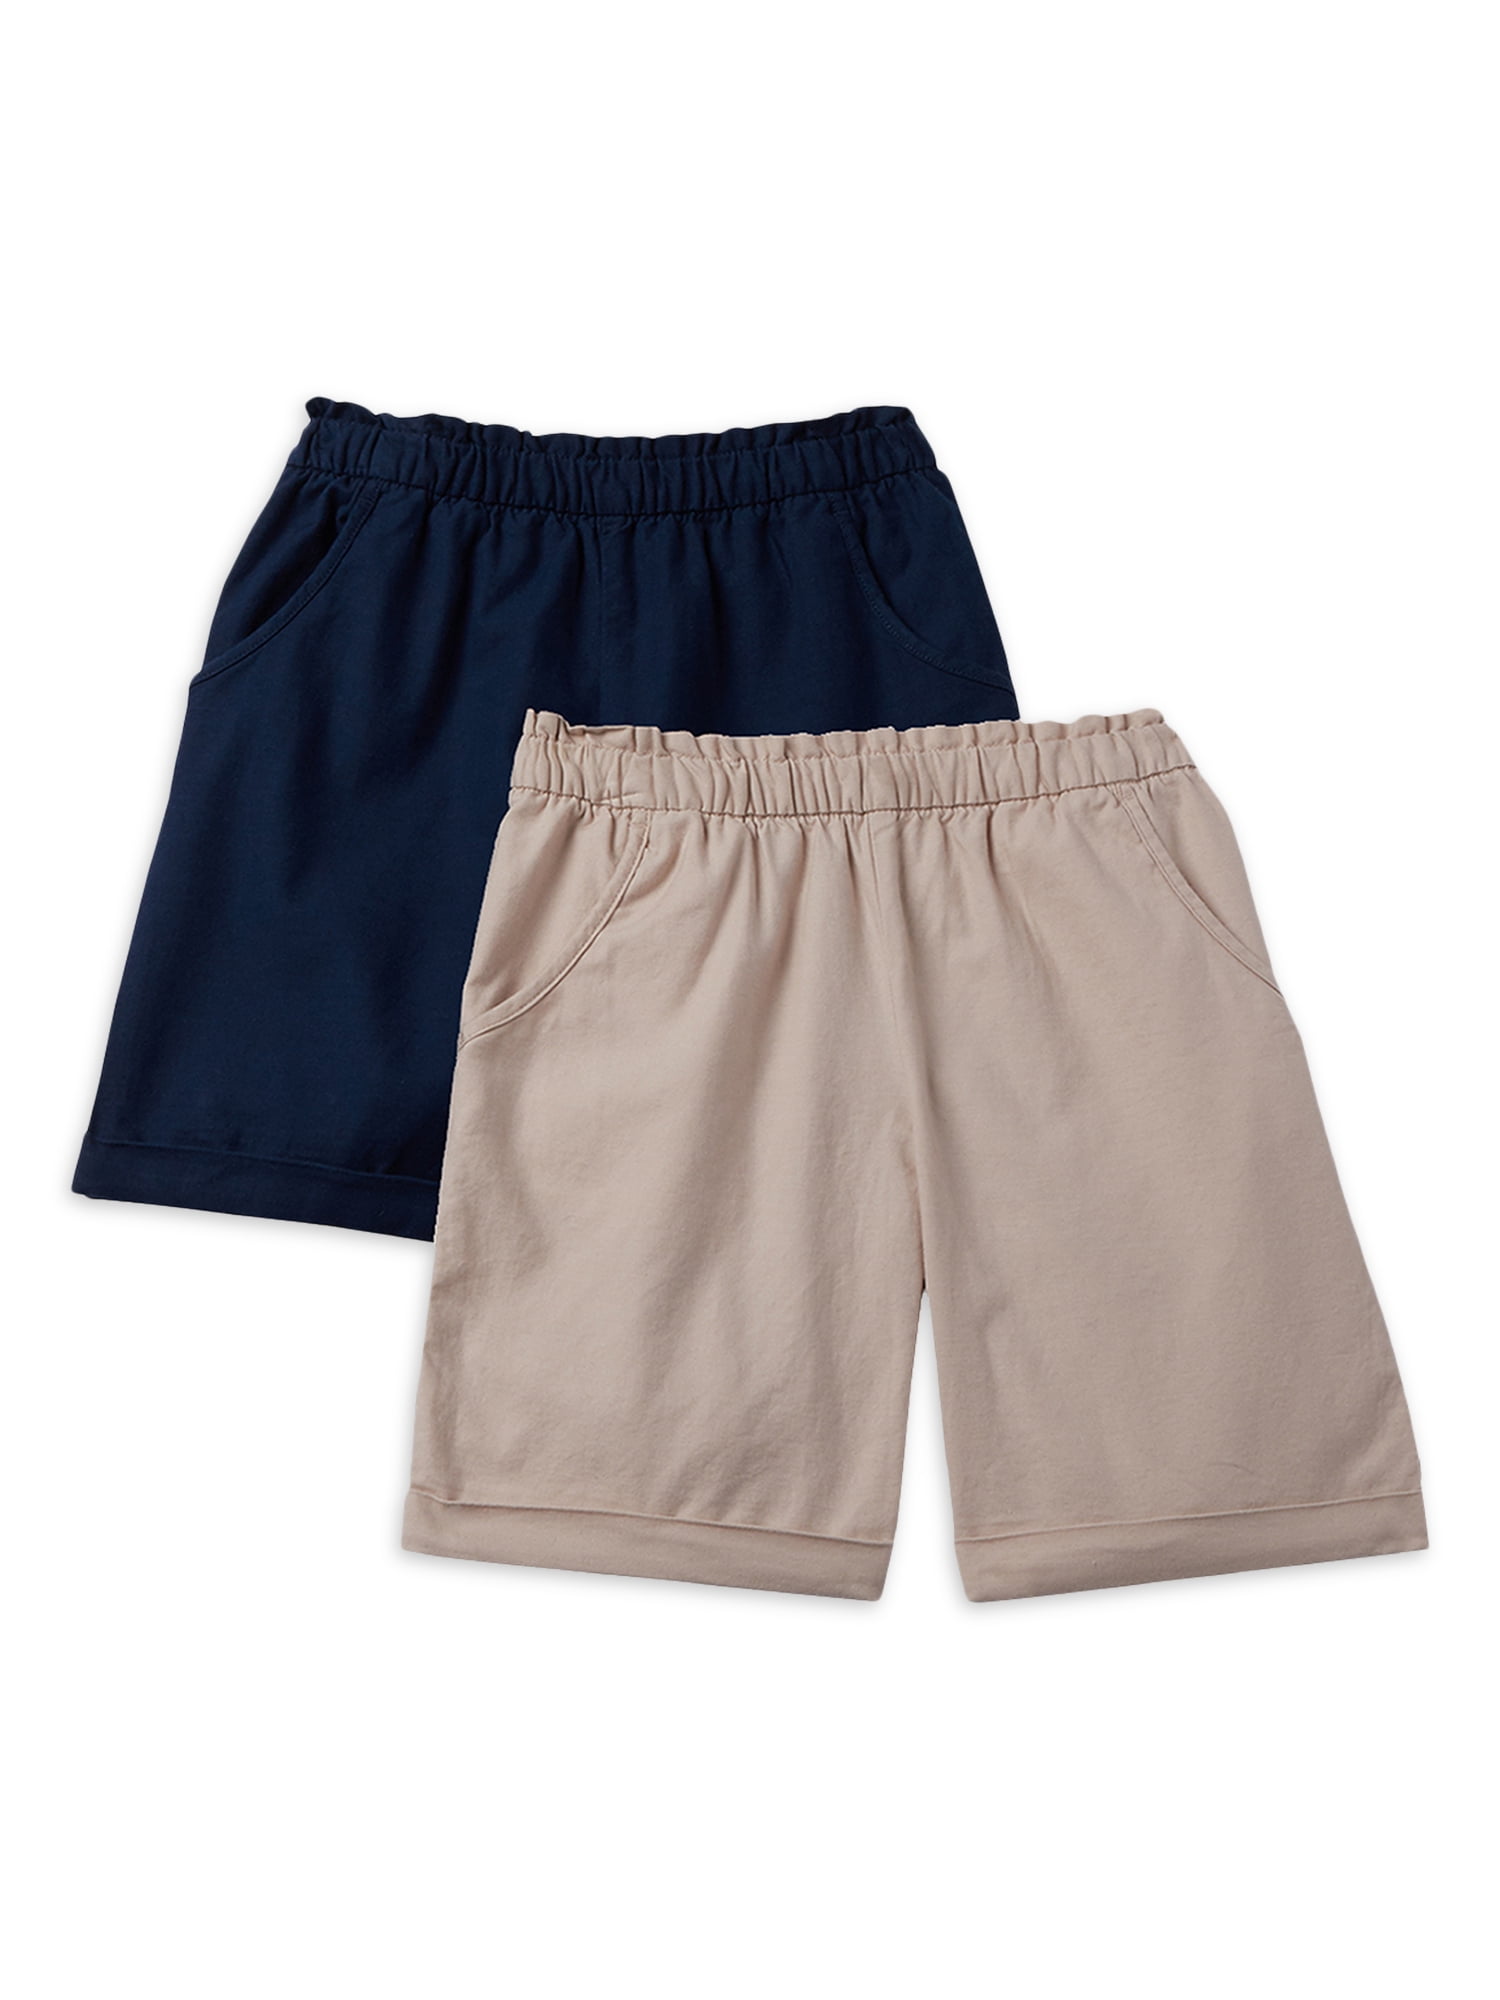 Essentials Girls 2-Pack Pull-on Woven Shorts